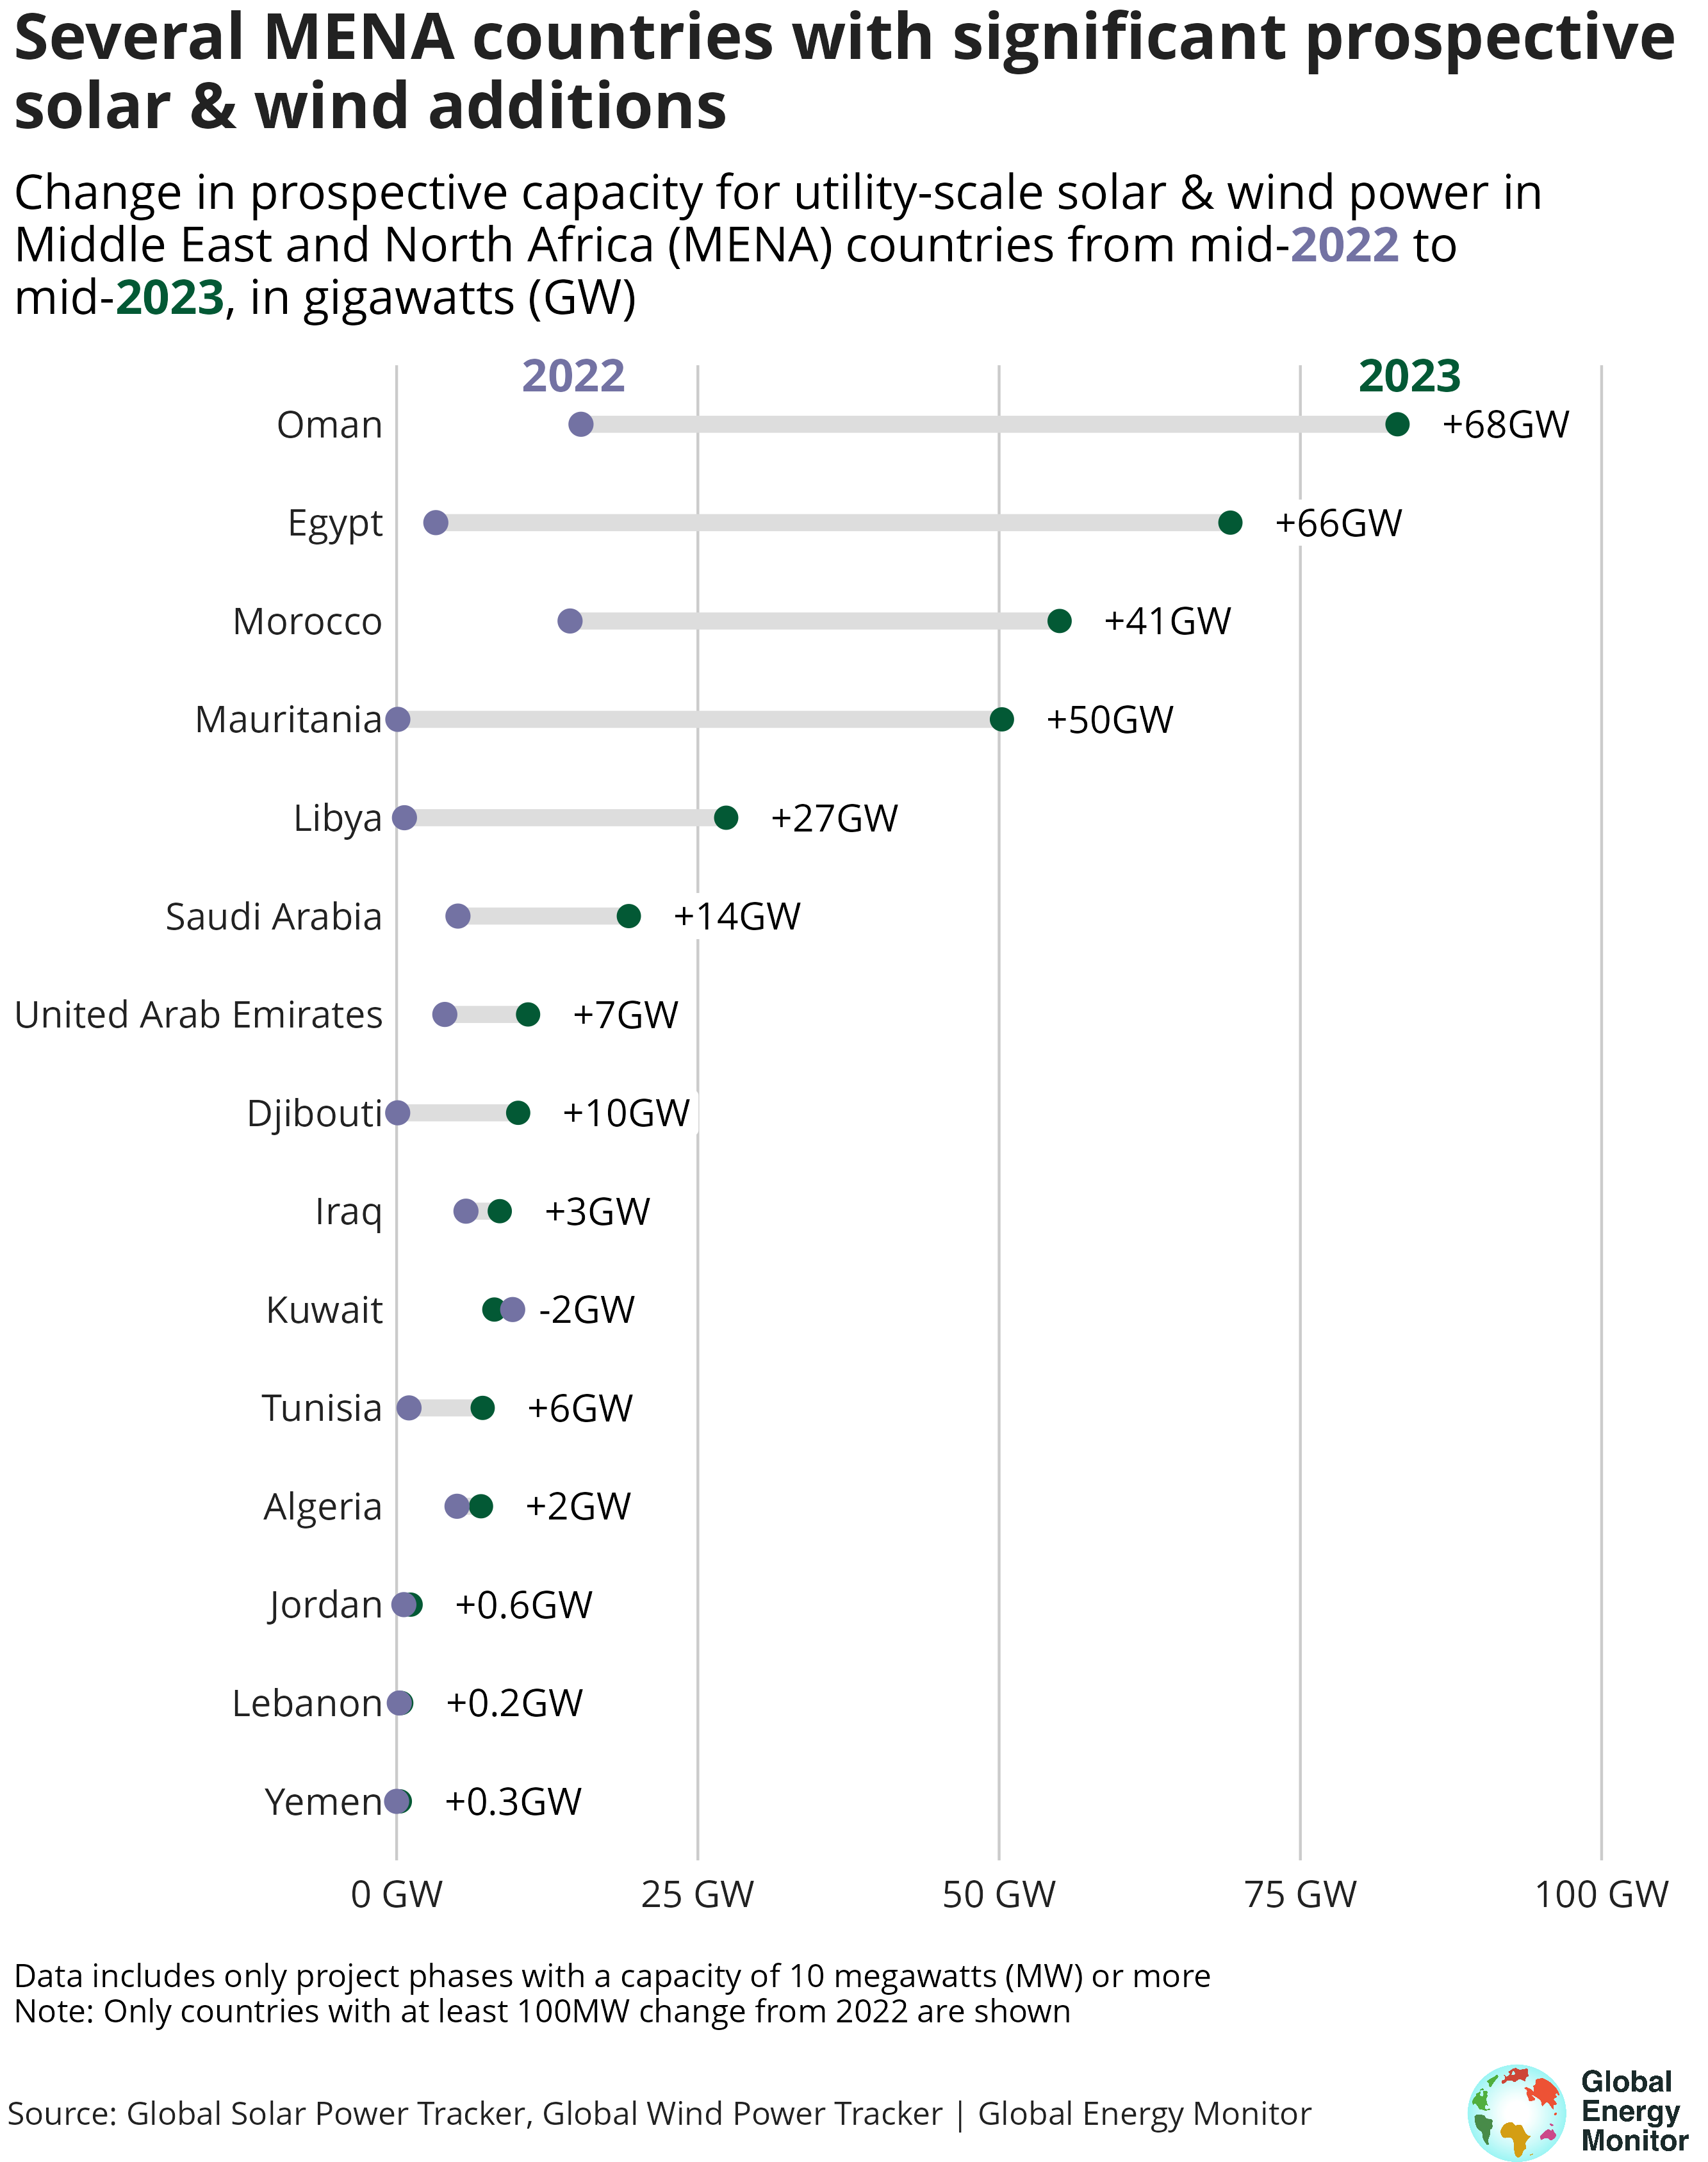 A dumbbell chart showing the change in prospective capacity for utility scale solar and wind power in MENA countries from 2022 to 2023, where Oman added the most at 68 gigawatts, Egypt second at 66 and Mauritania with 50GW additions, as Jordan, Lebanon and Yemen have almost no planned prospective capacity across both years. 